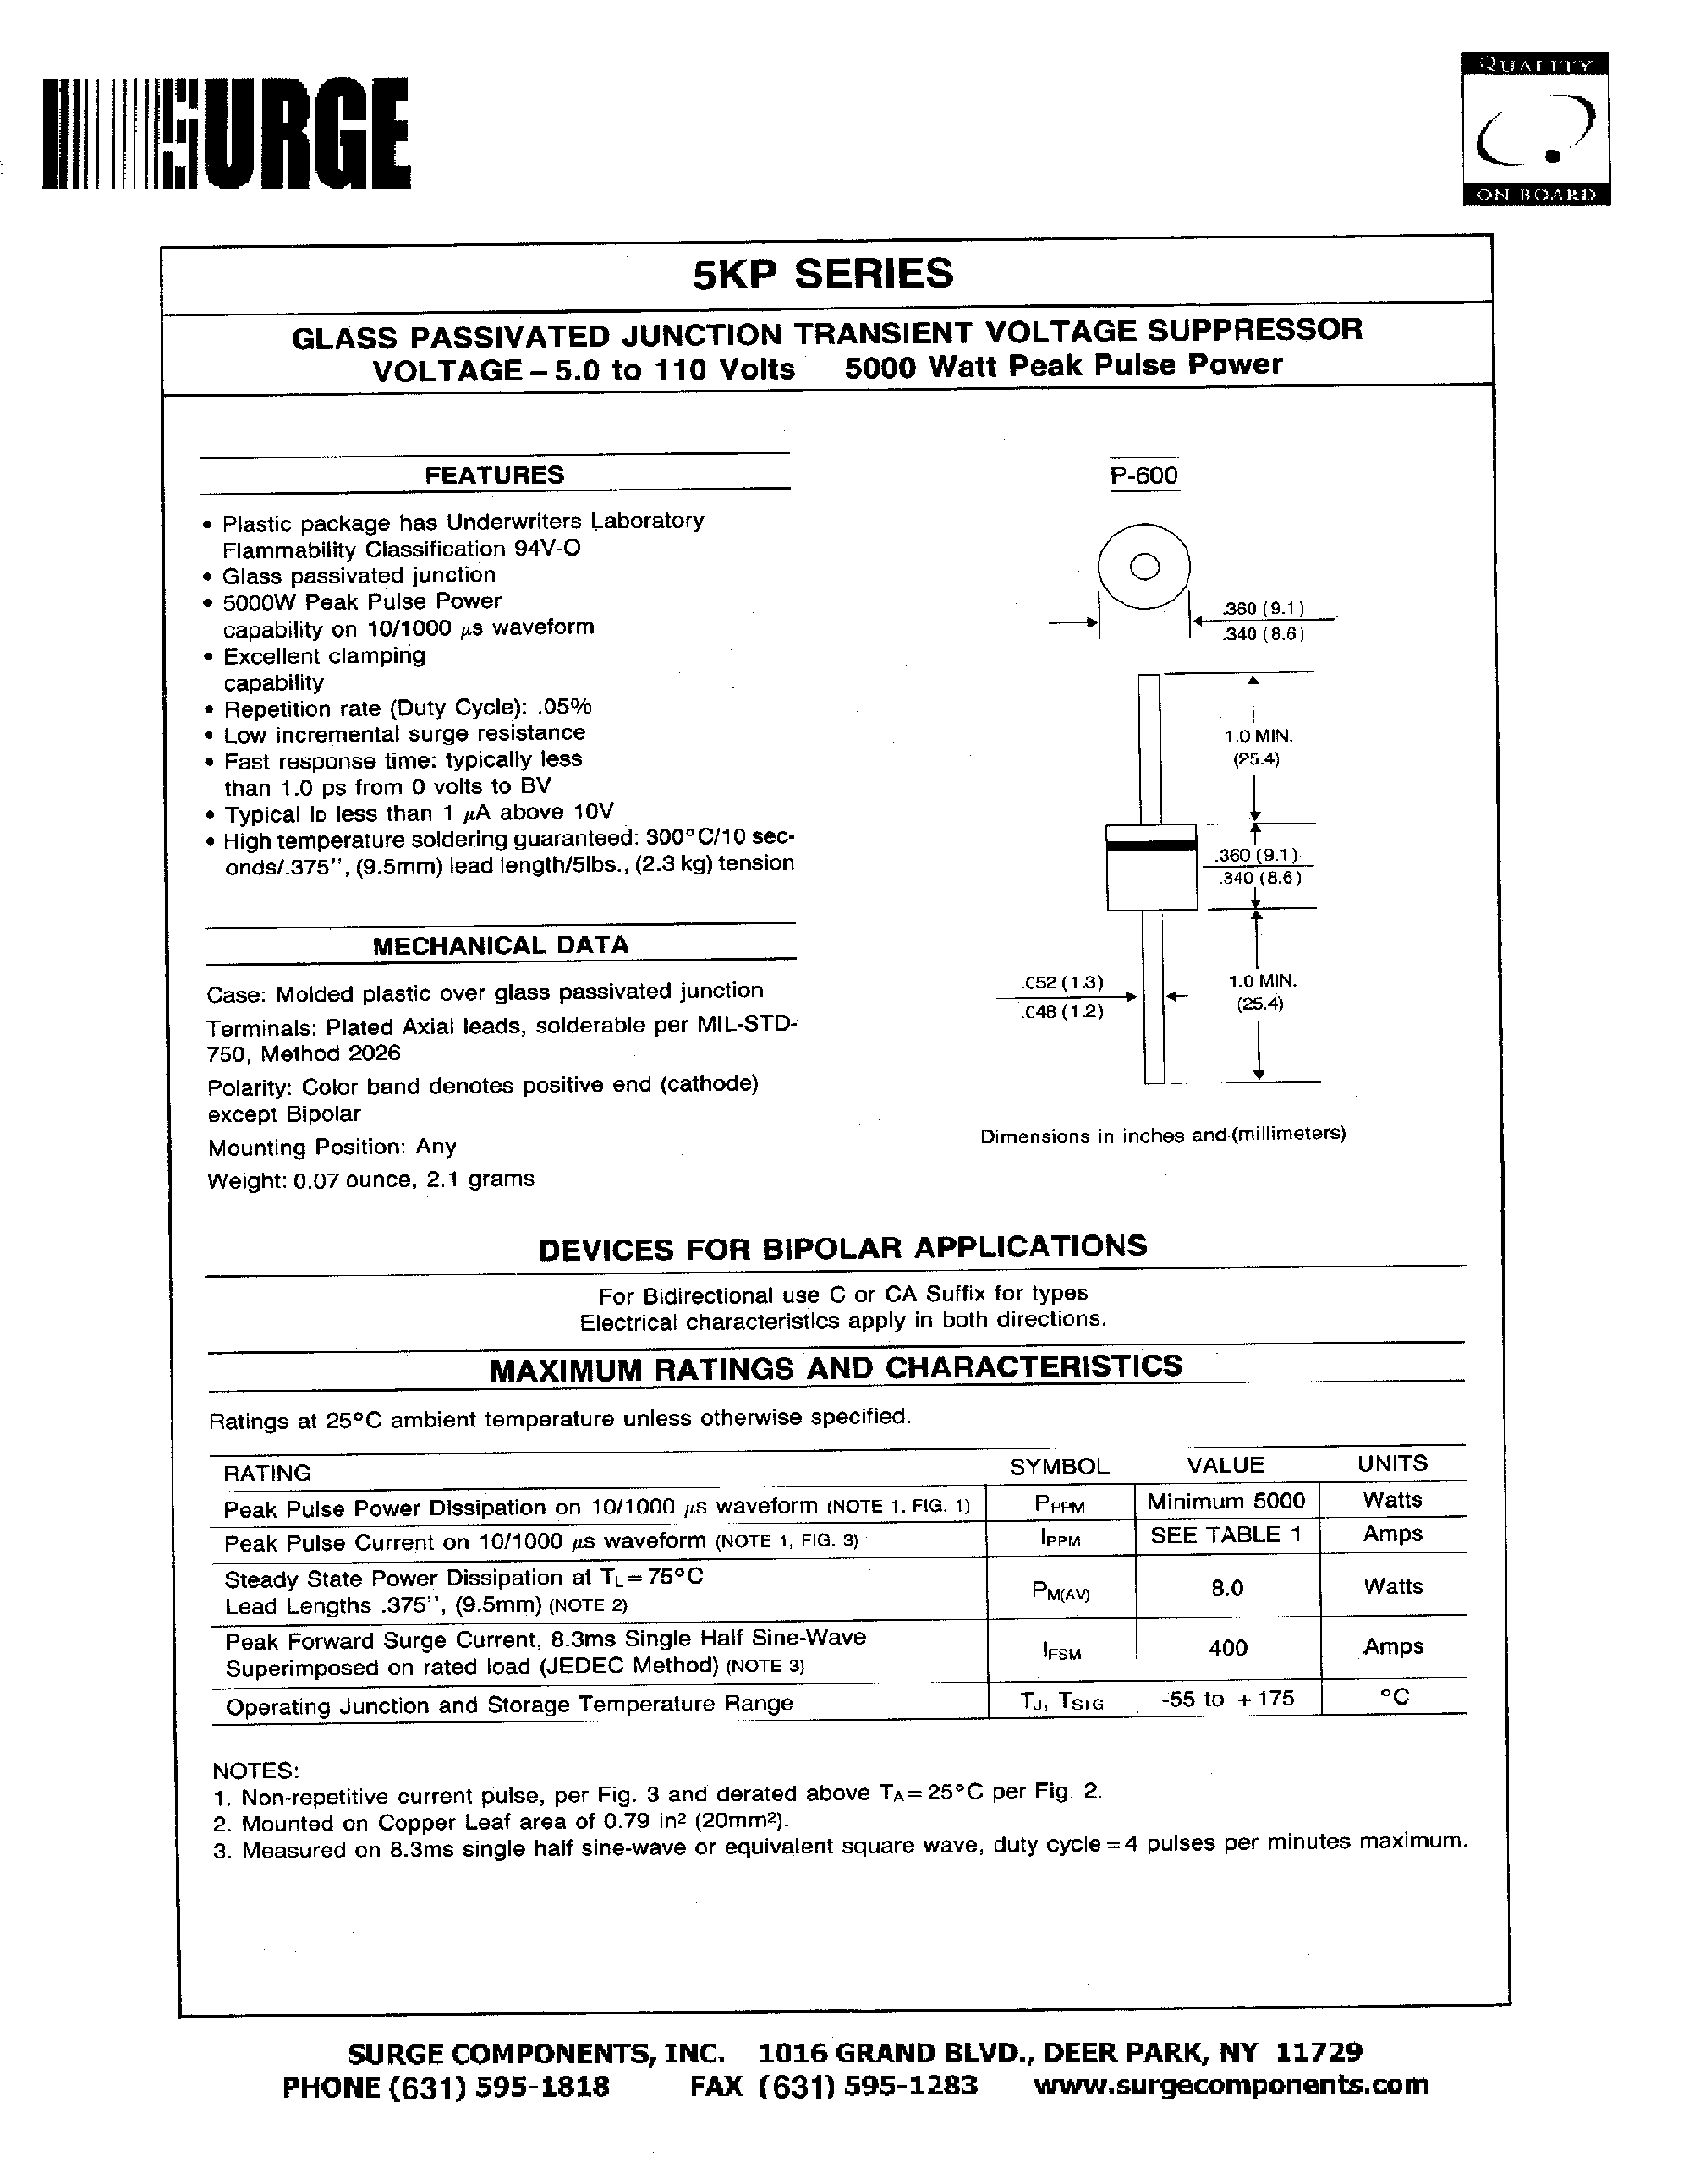 Datasheet 5KP7.5 - GLASS PASSIVATED JUNCTION TRANSIENT VOLTAGE SUPPRESSOR VOLTAGE-5.0 to 110 Volts page 1